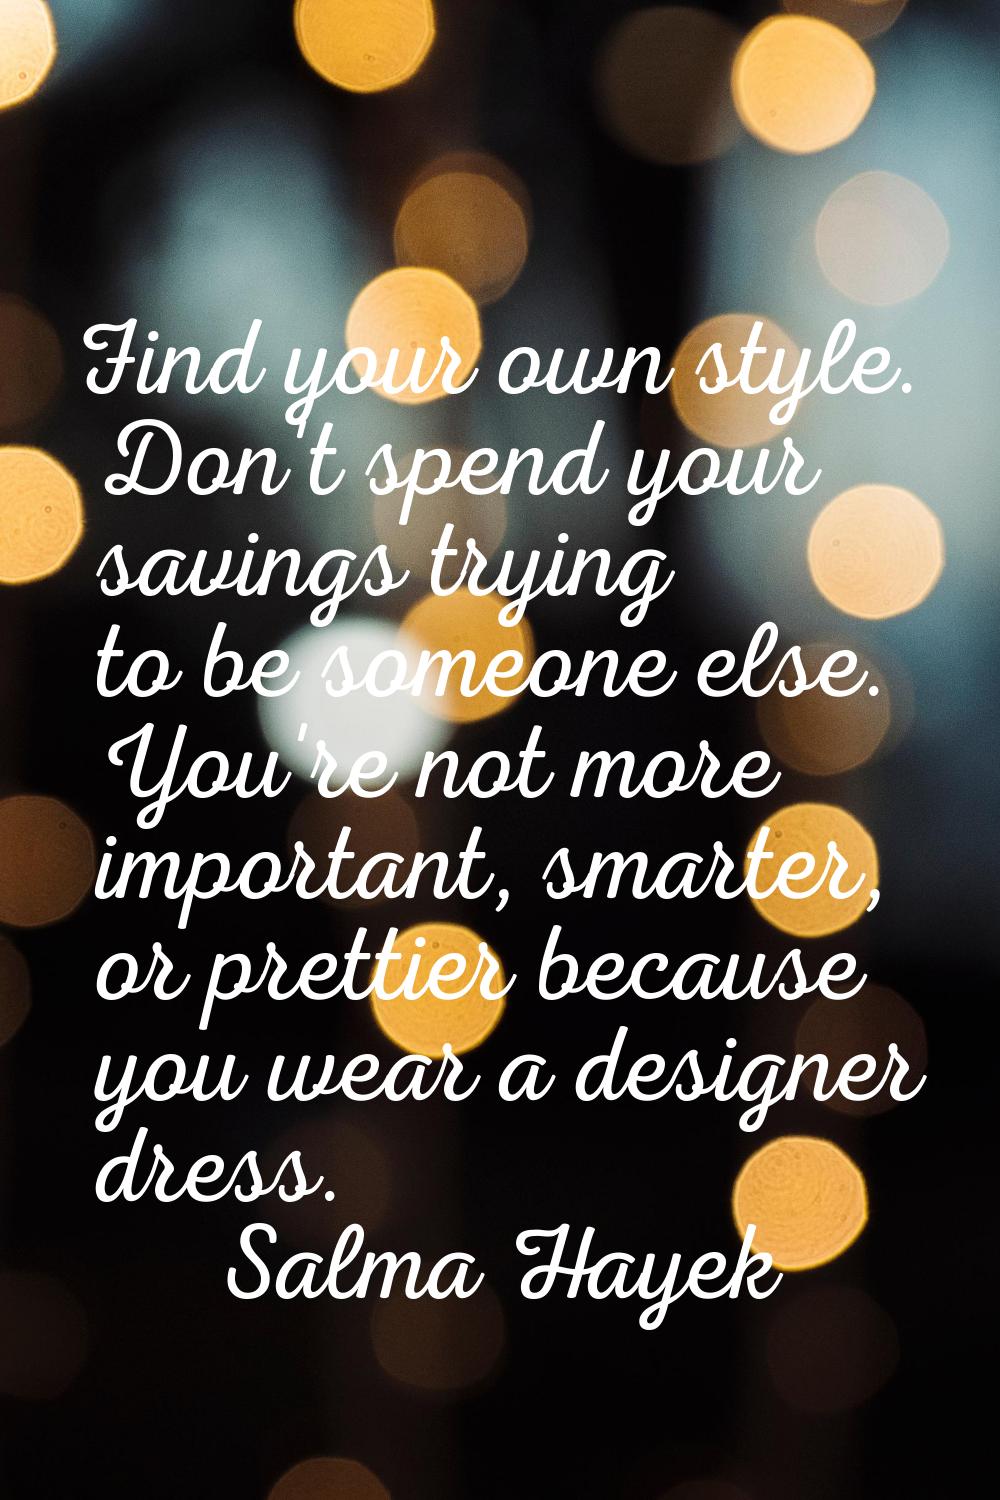 Find your own style. Don't spend your savings trying to be someone else. You're not more important,